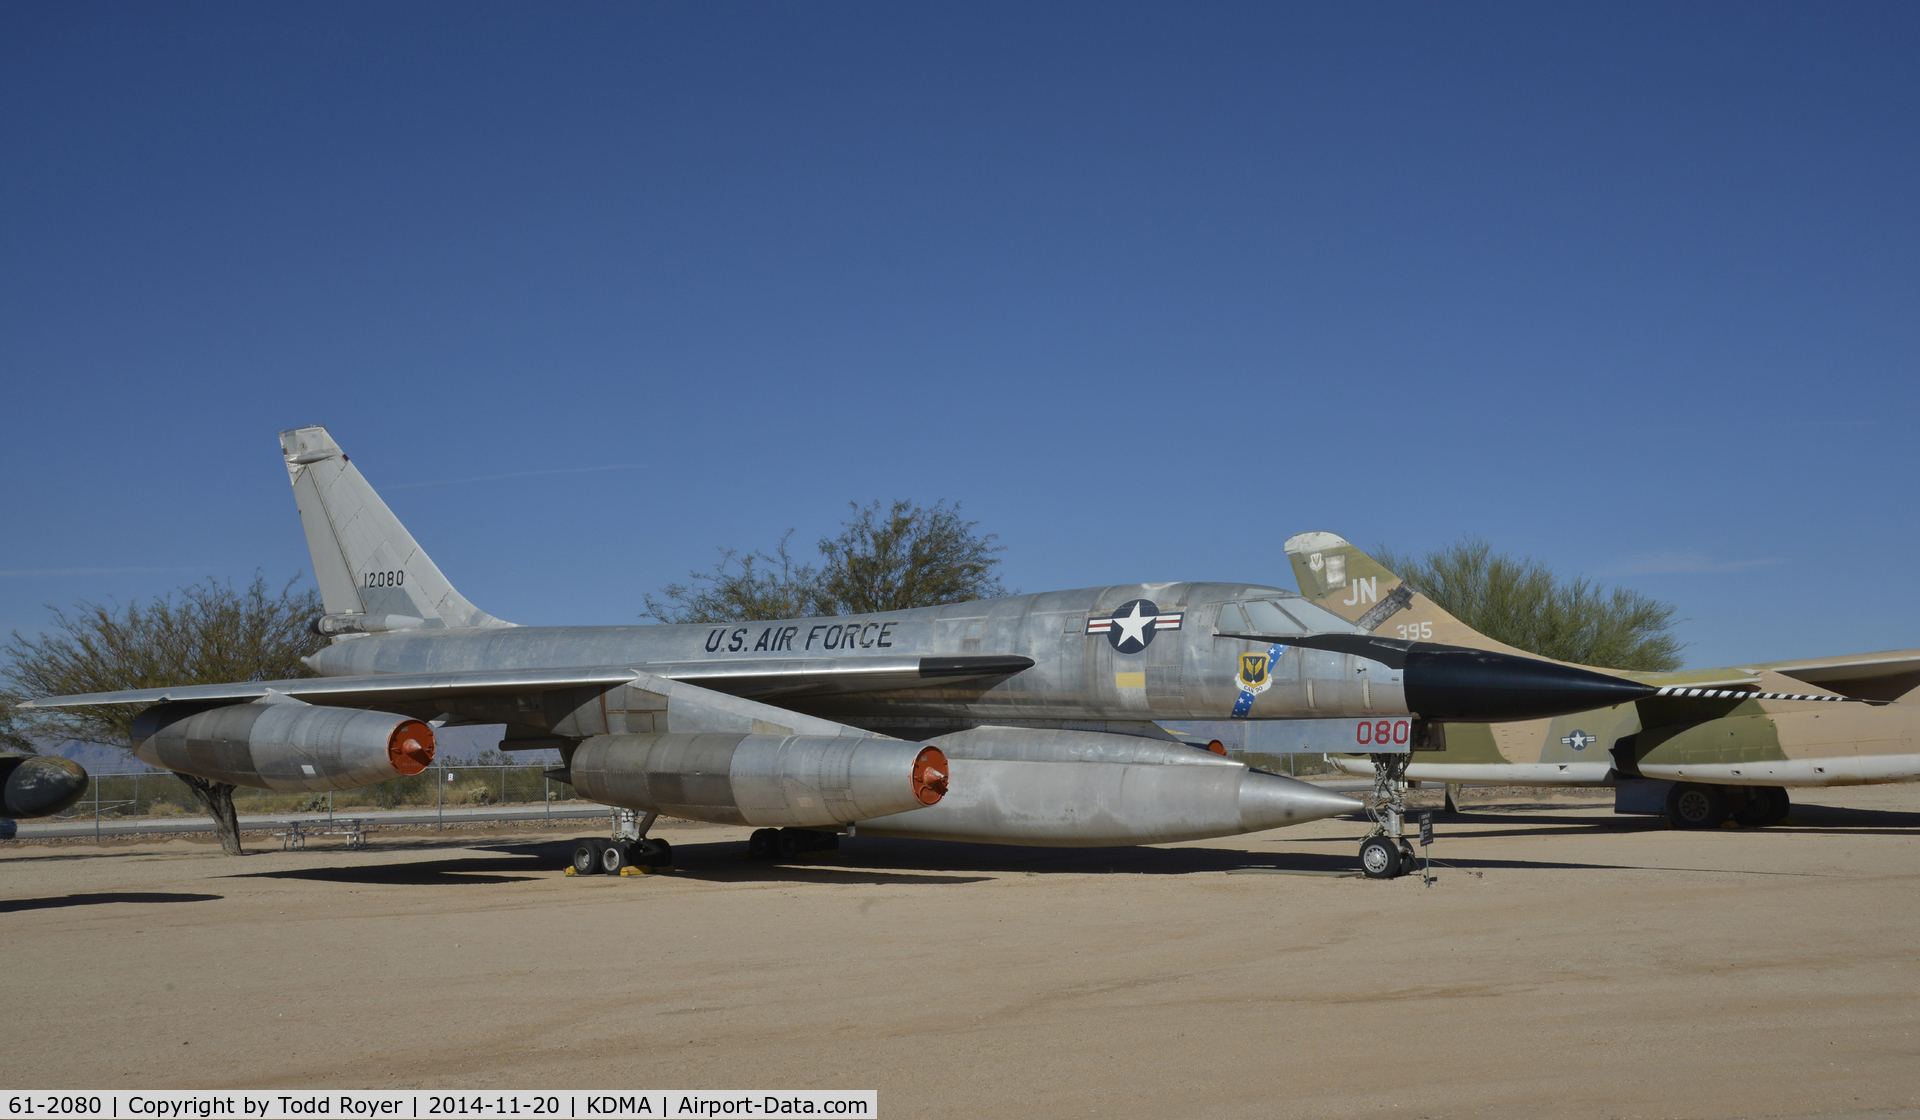 61-2080, 1961 Convair B-58A Hustler C/N 116, On Display at the Pima Air and Space Museum